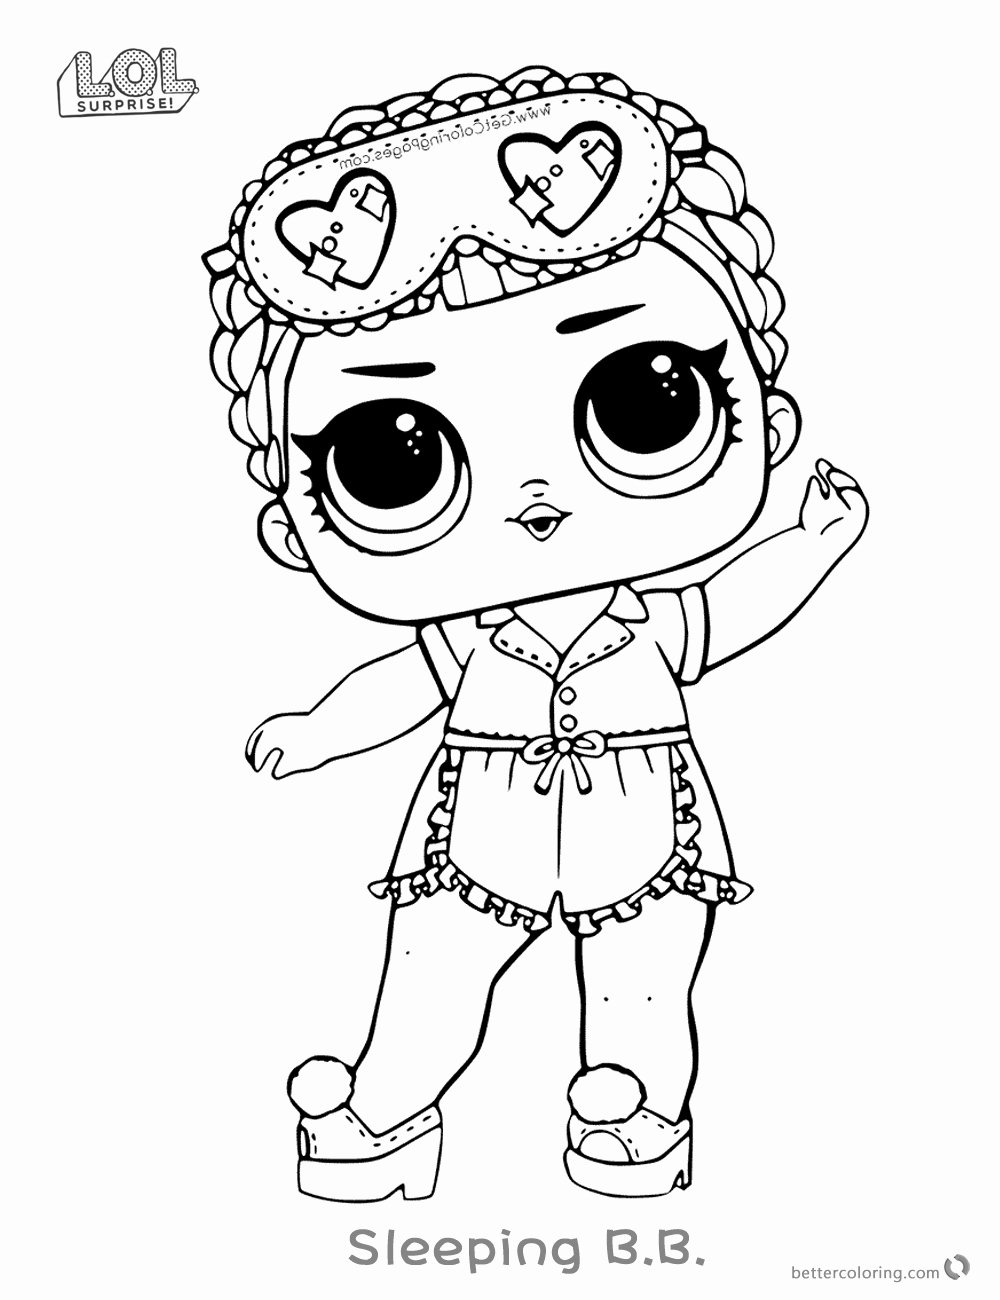 Lol Doll Coloring Pages at GetColorings.com | Free printable colorings ...